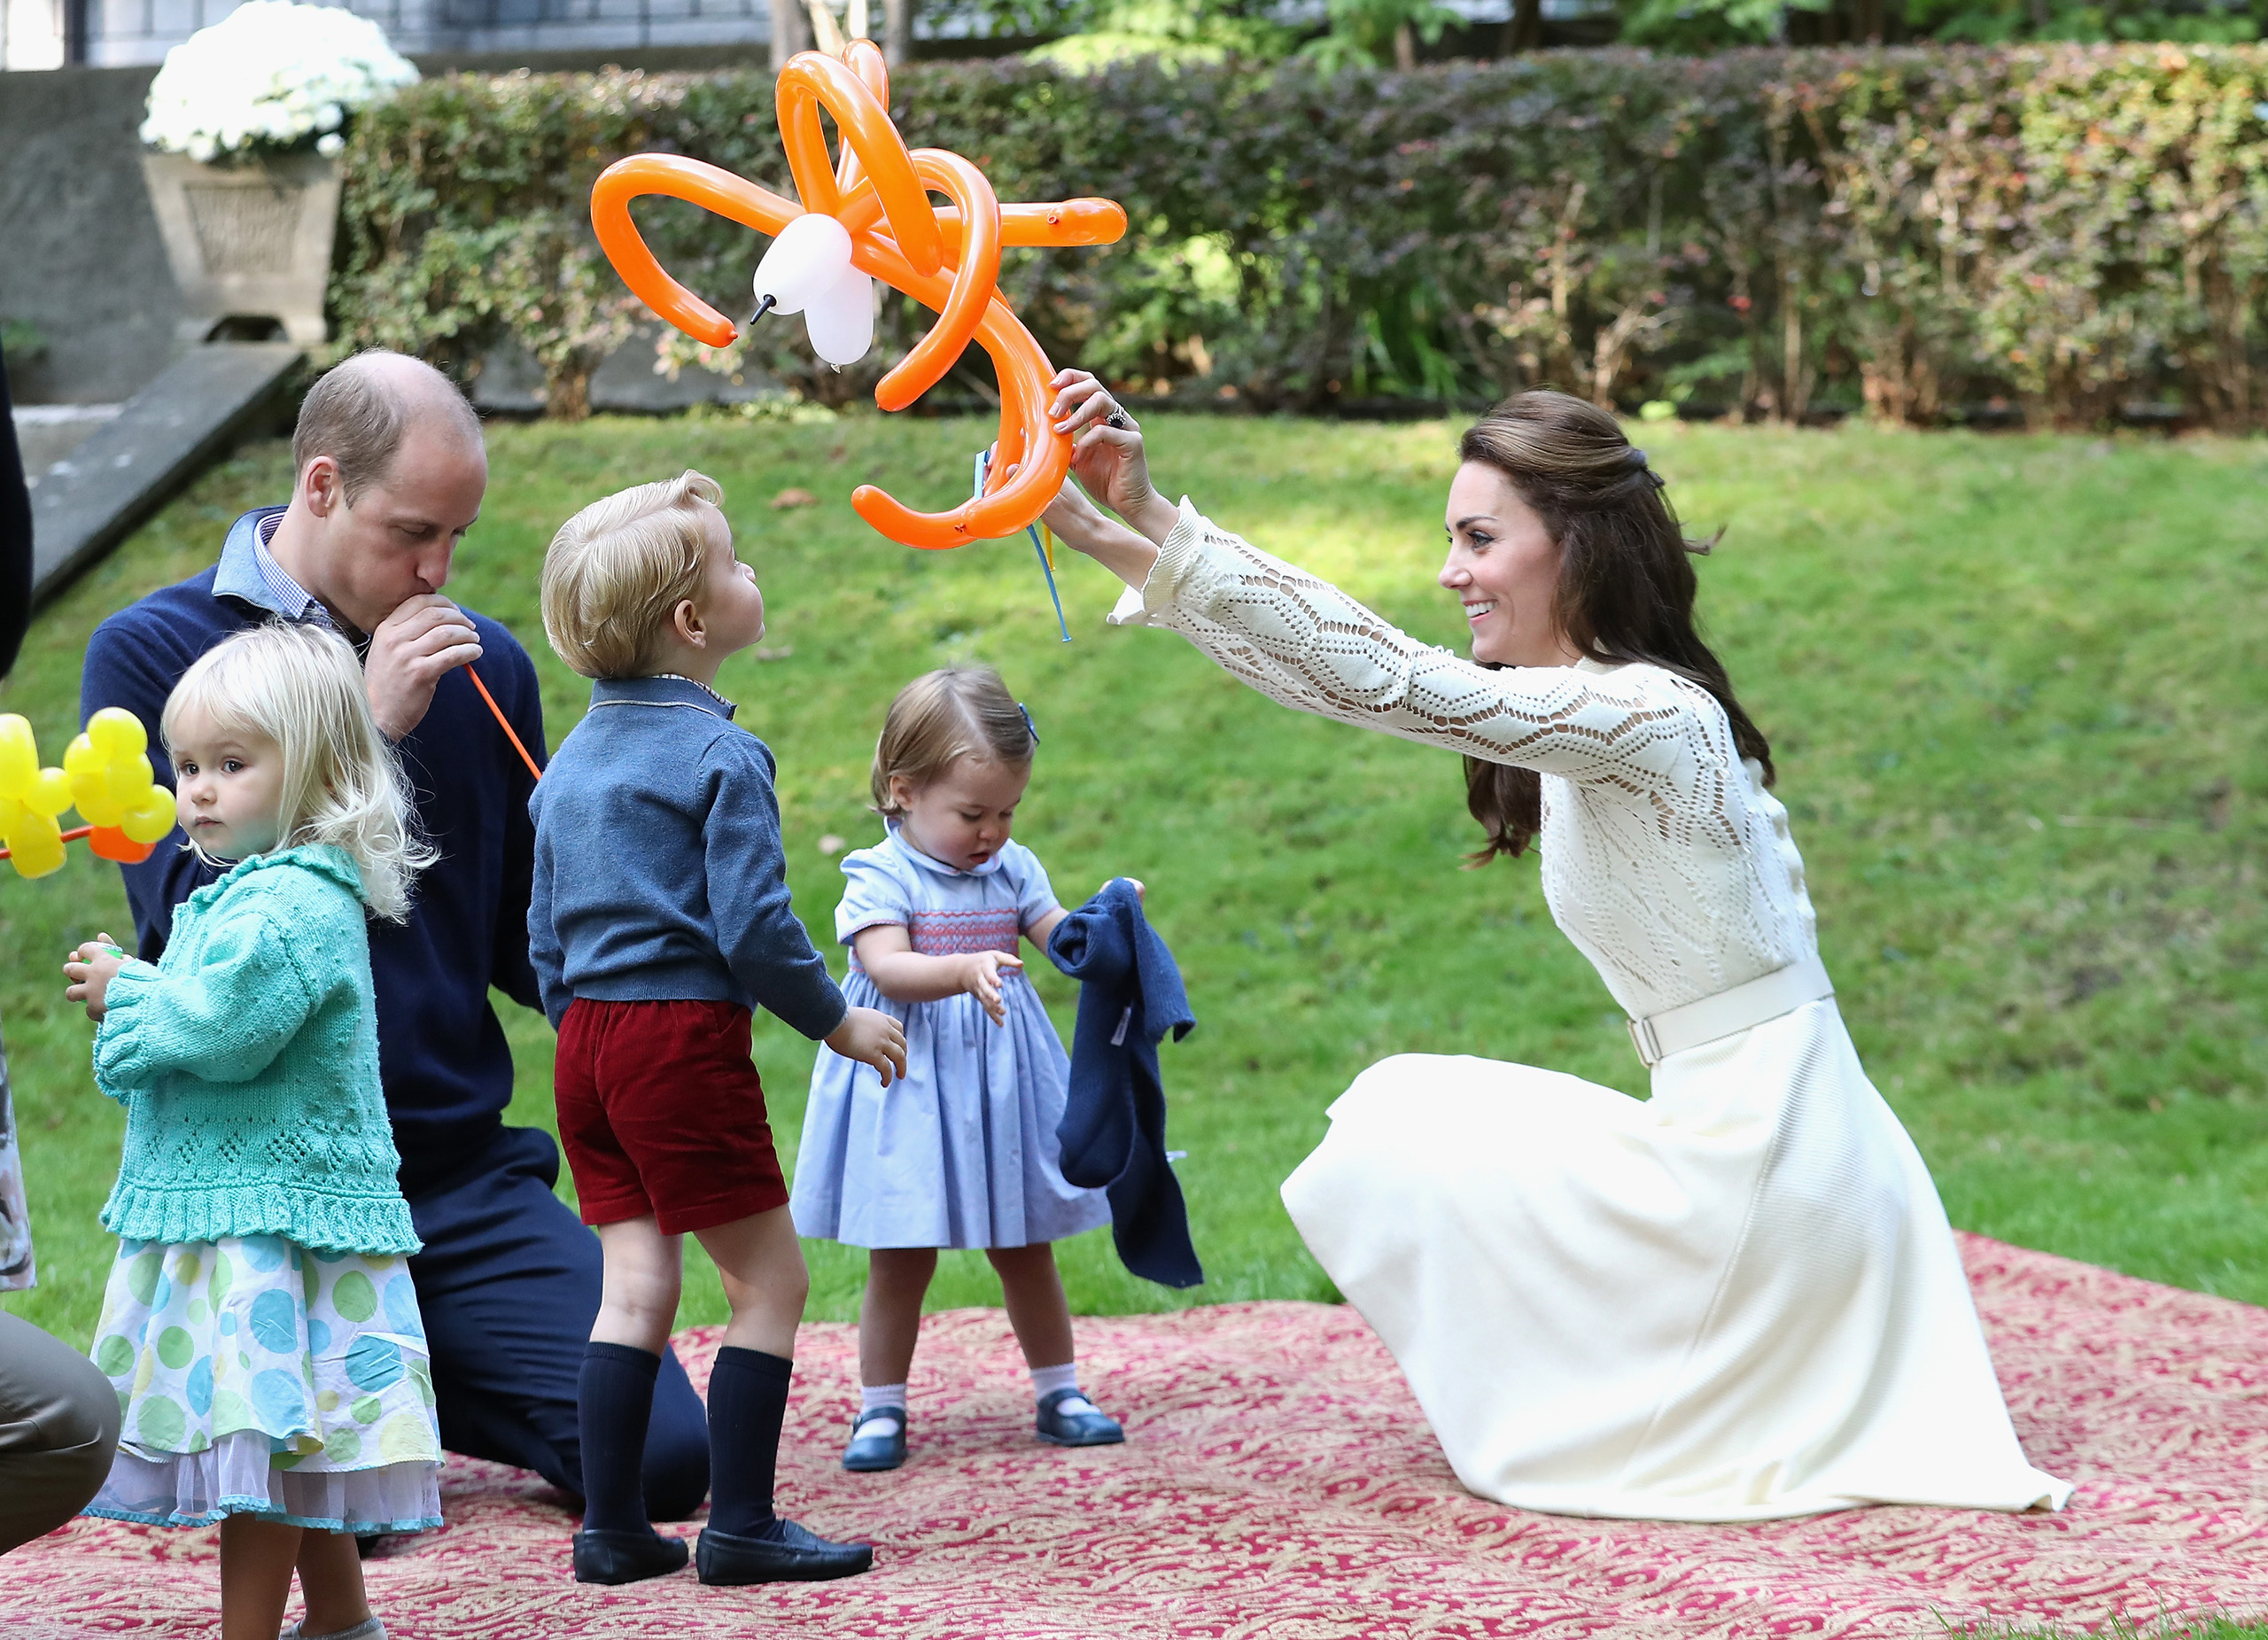 Catherine, Duchess of Cambridge, Princess Charlotte of Cambridge and Prince George of Cambridge at a children's party for Military families  in Victoria, Canada, on Sept. 29, 2016.